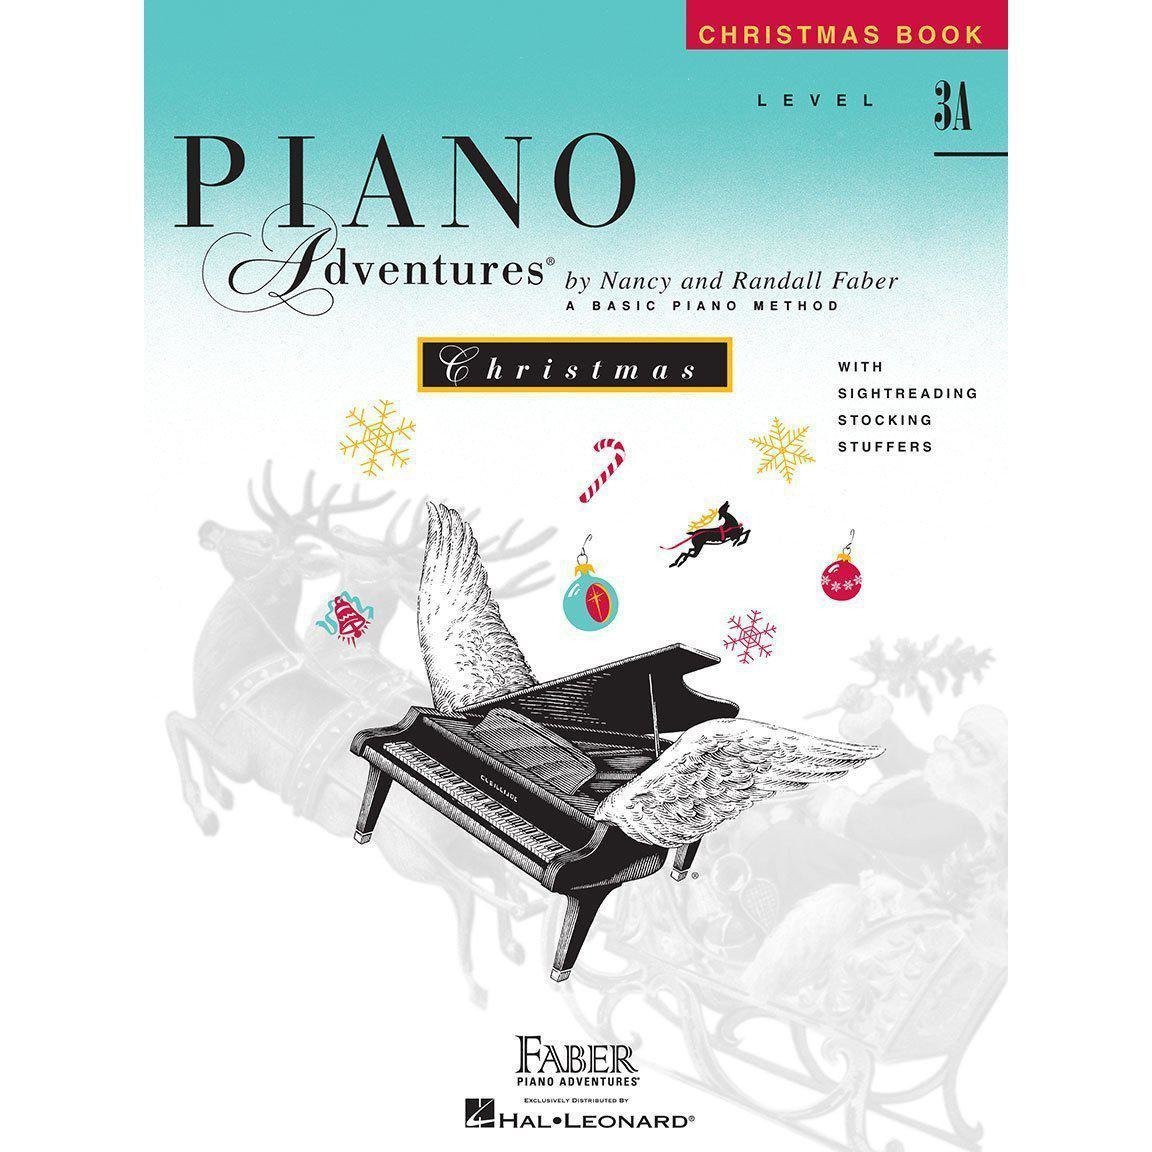 Faber Piano Adventures-3A-Christmas-Andy's Music